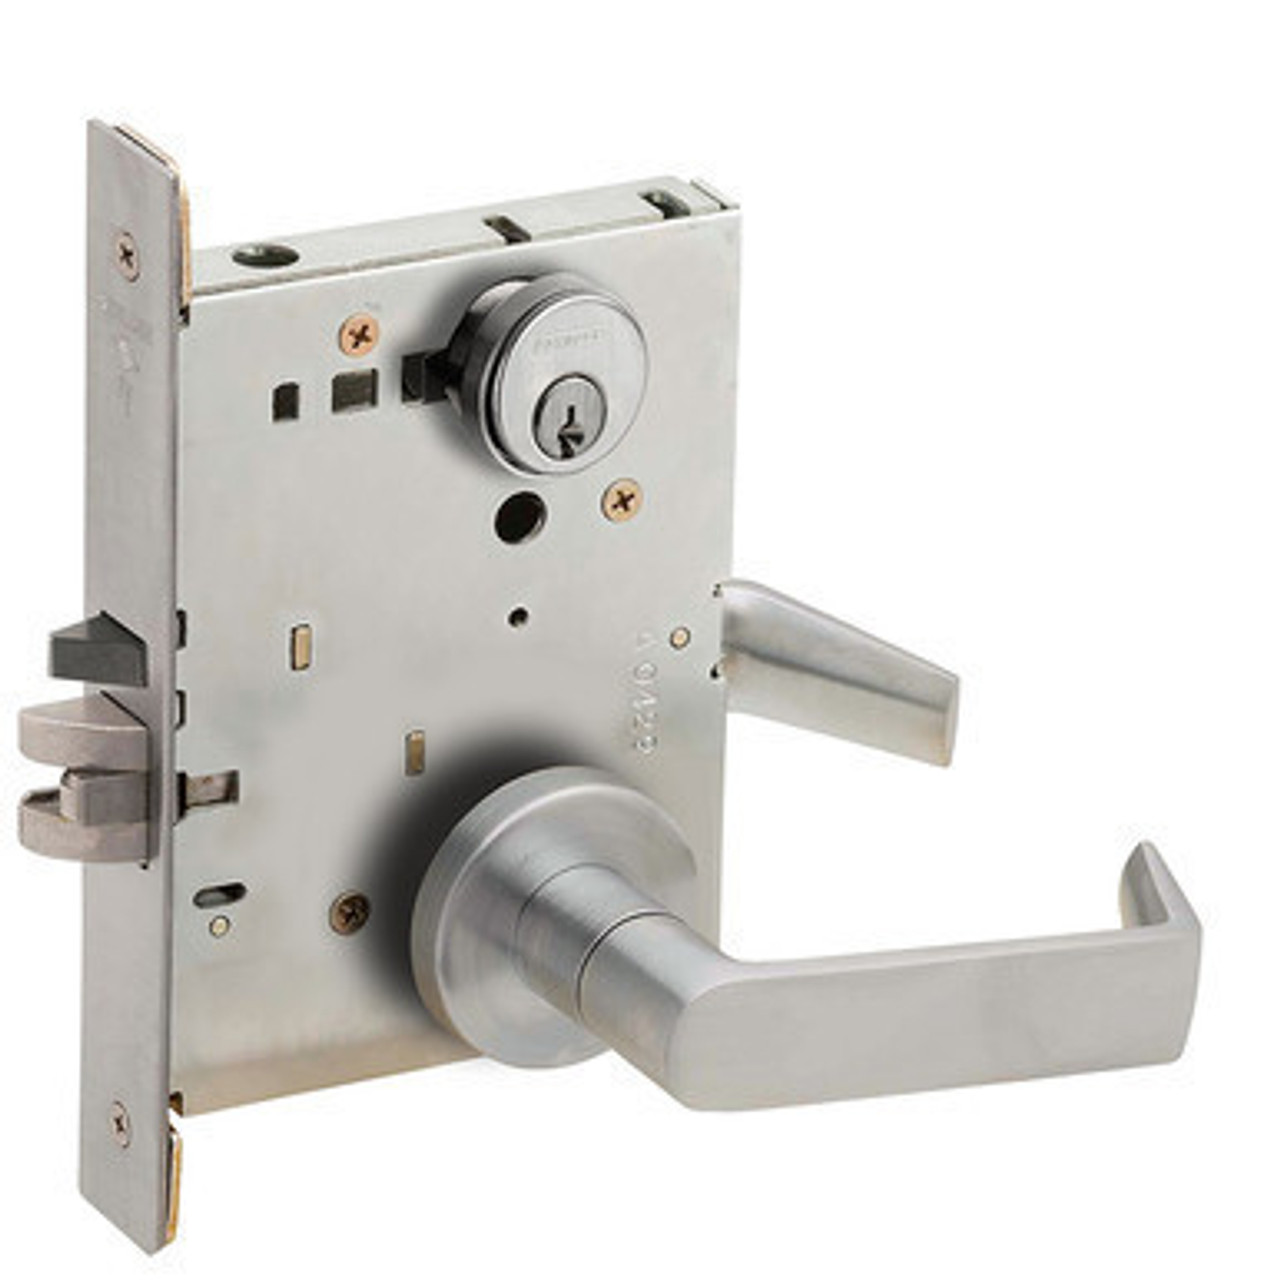 Schlage L9095ELP 18A Electrified Mortise Lock, Fail Safe, w/ Double Cylinder